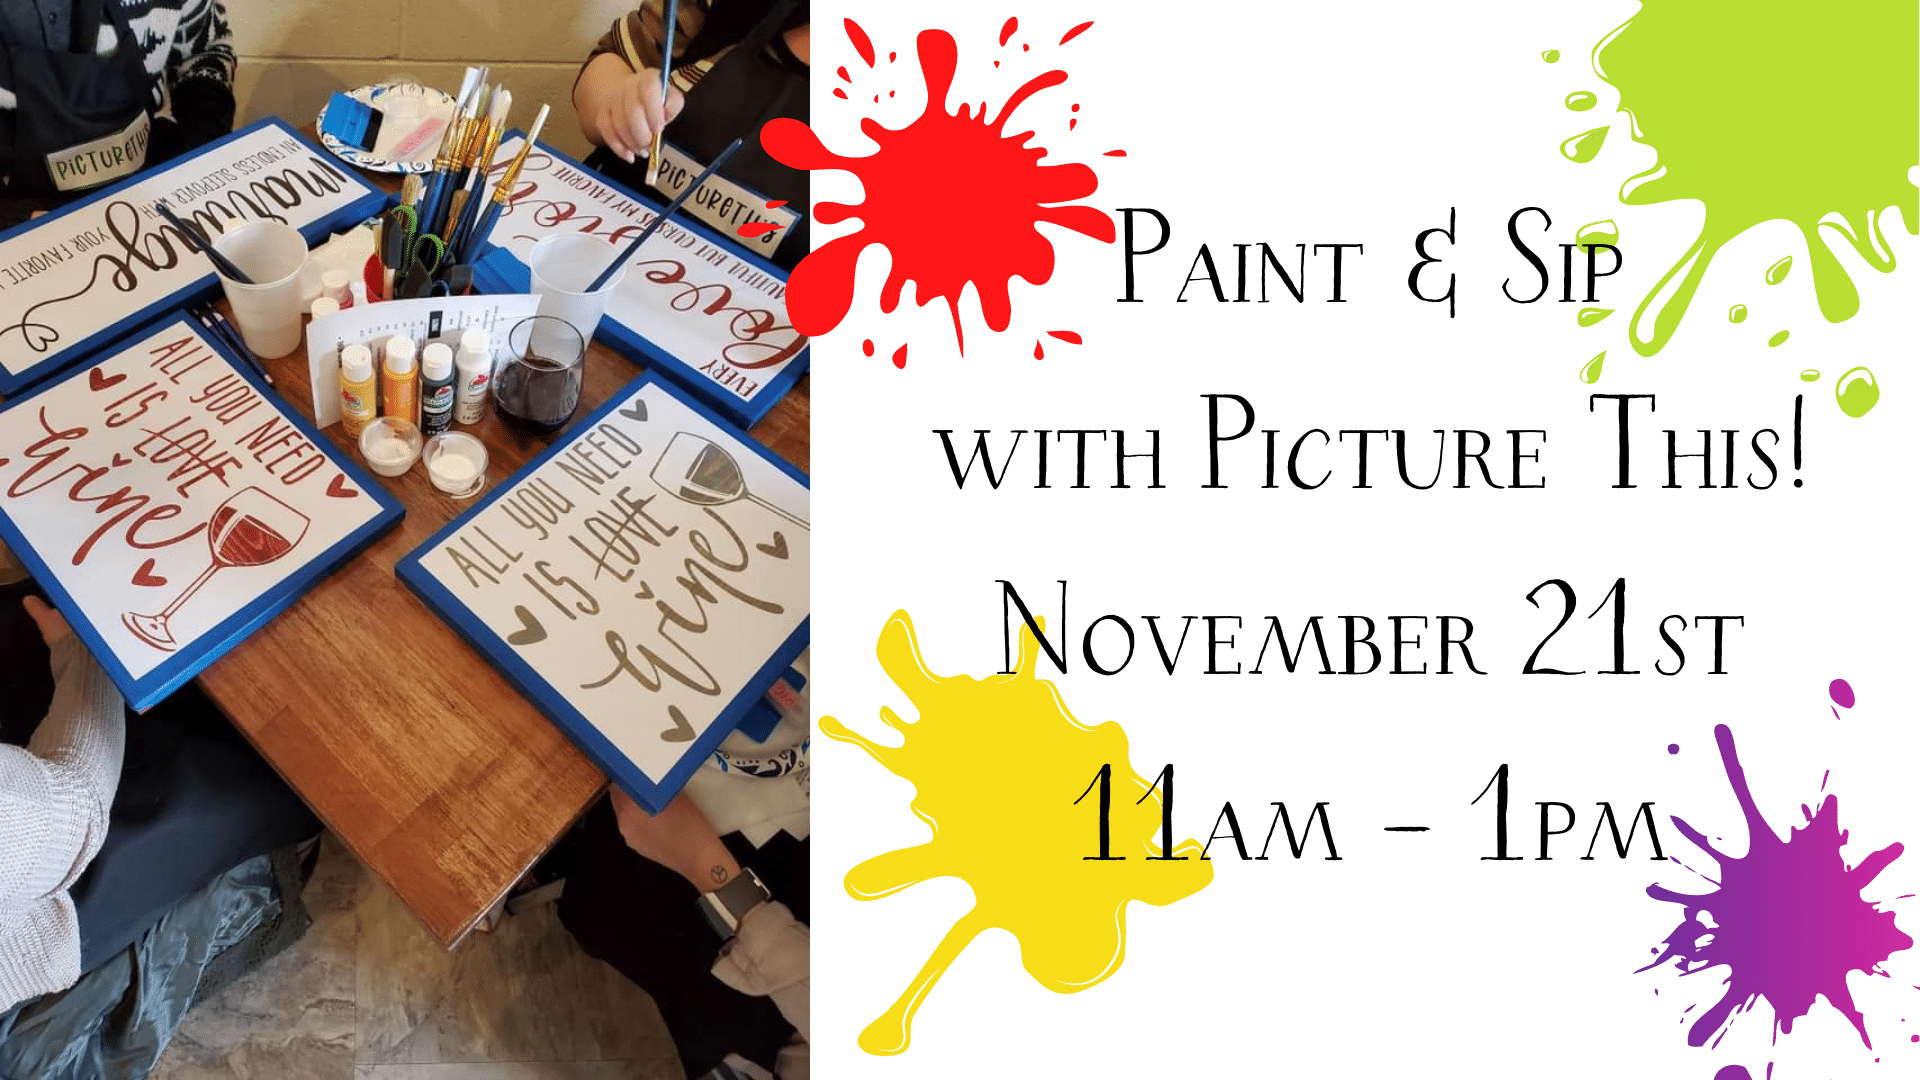 Winter Themed Workshop with Picture This!